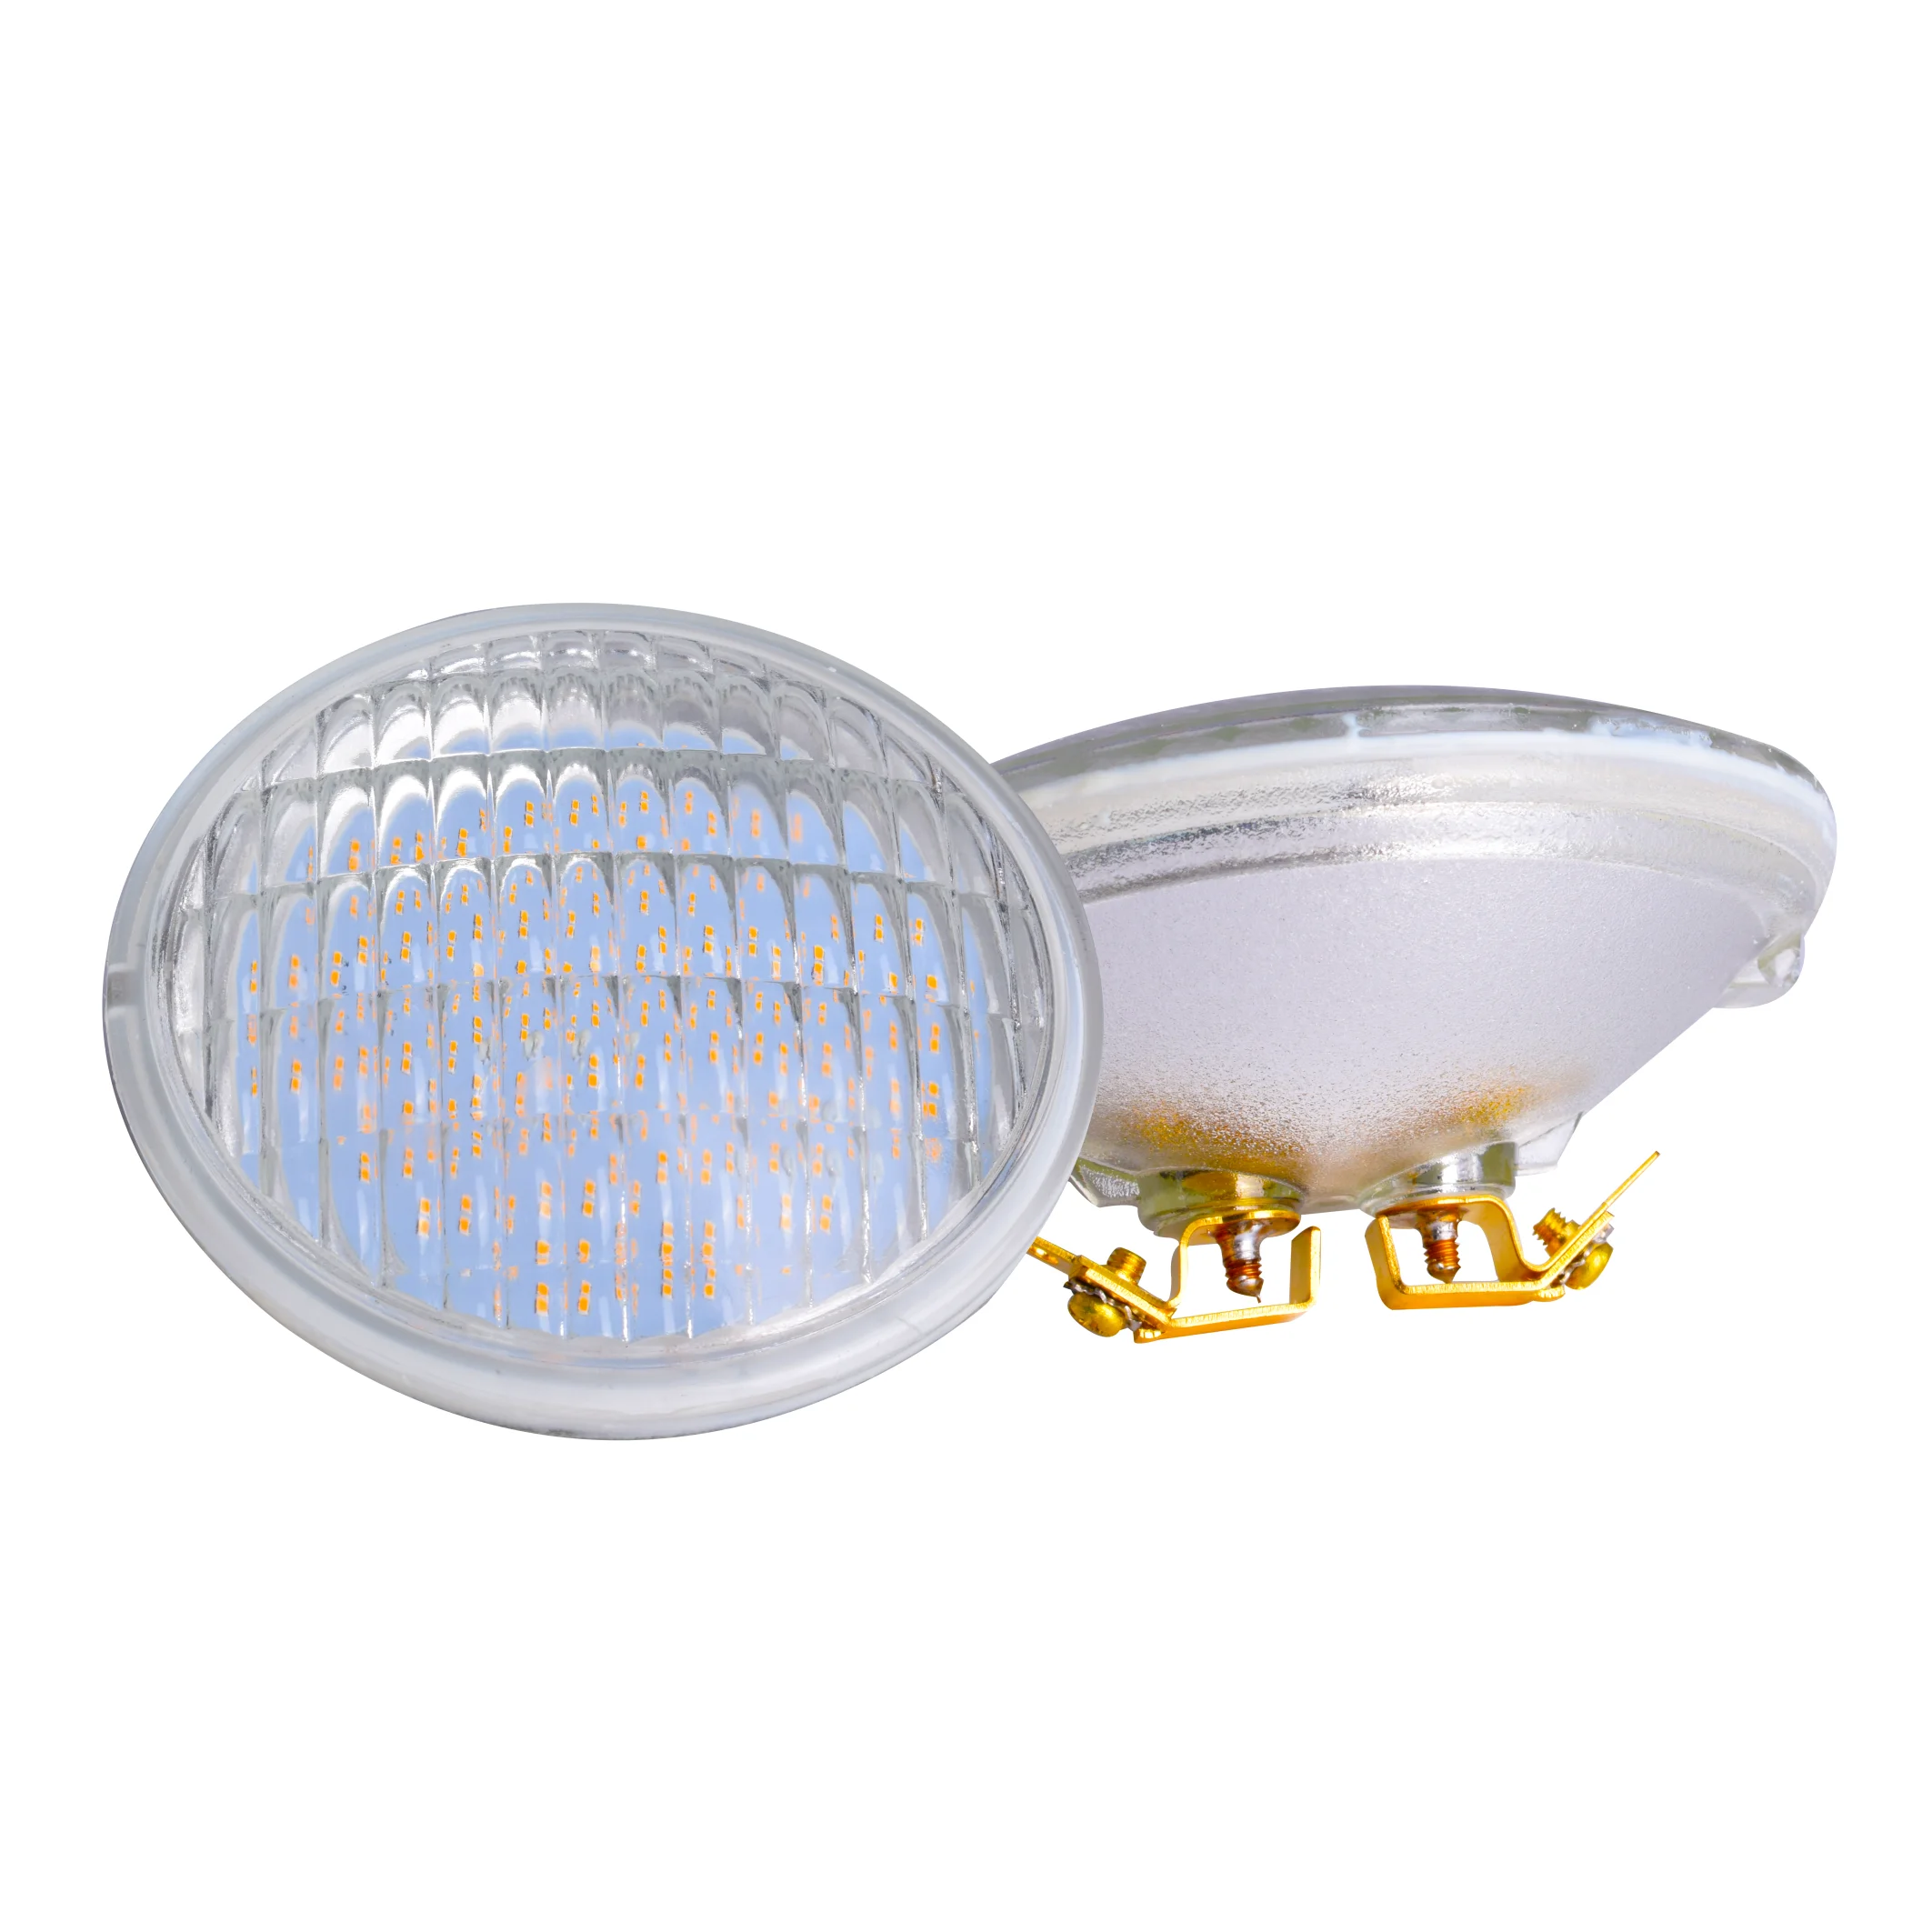 10-30Vac/dc 50W or 100W halogen replacement 120degree 5W or 9W spot light or flood light LED PAR36